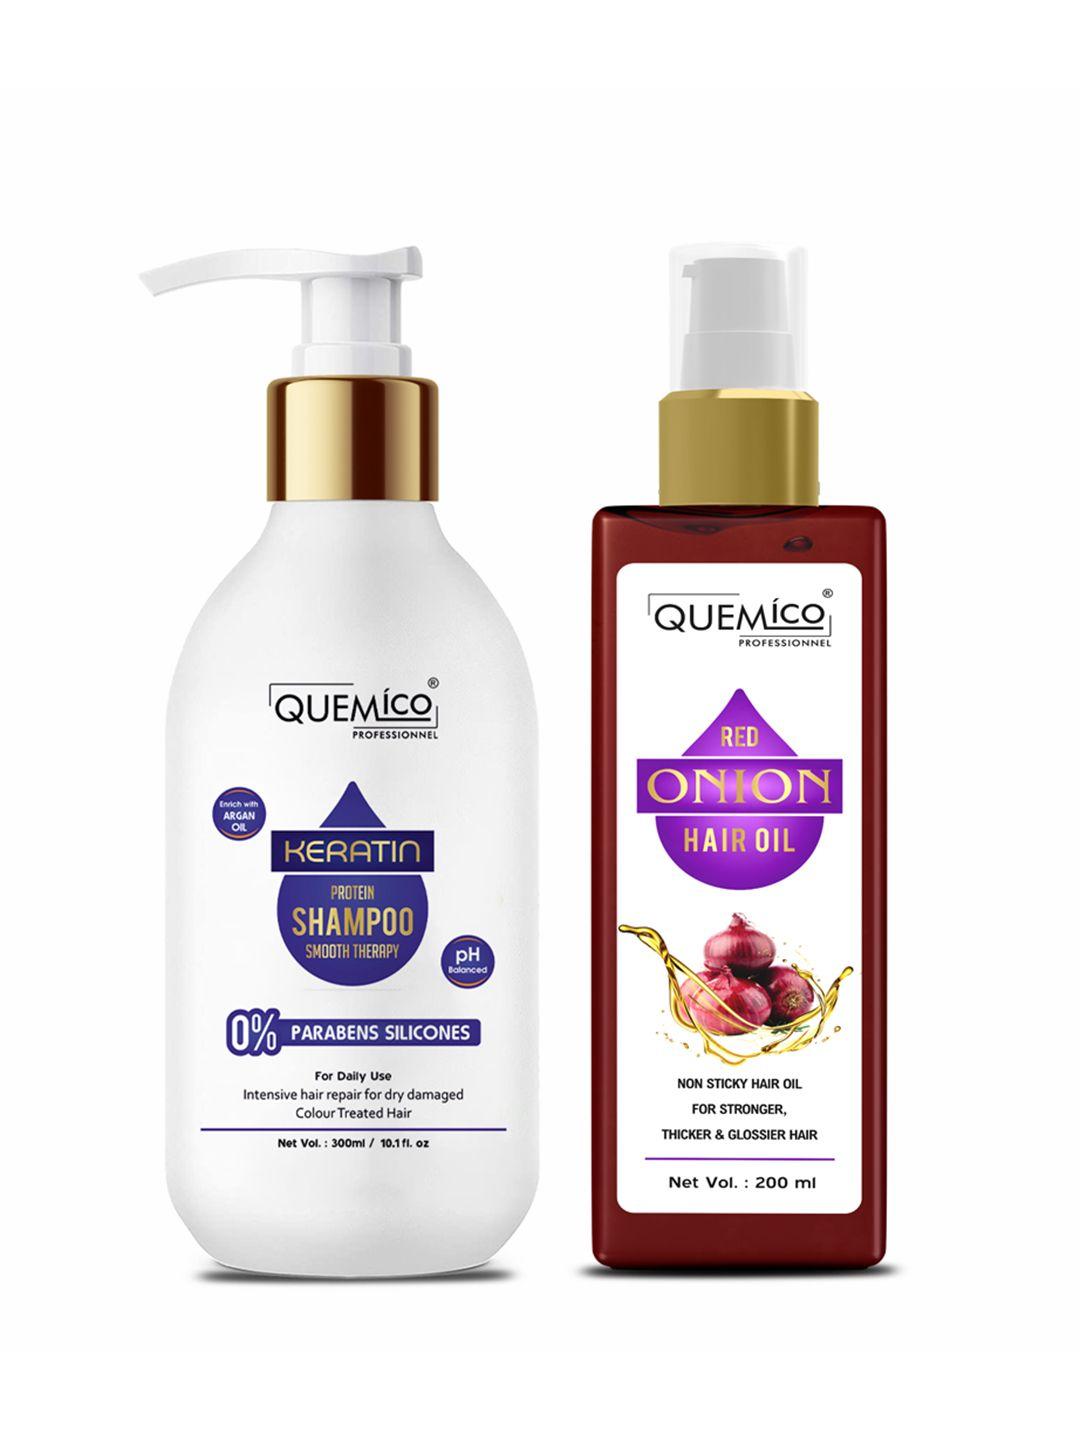 quemico professionnel set of 2 keratin protein shampoo (300ml) & red onion hair oil (200ml)